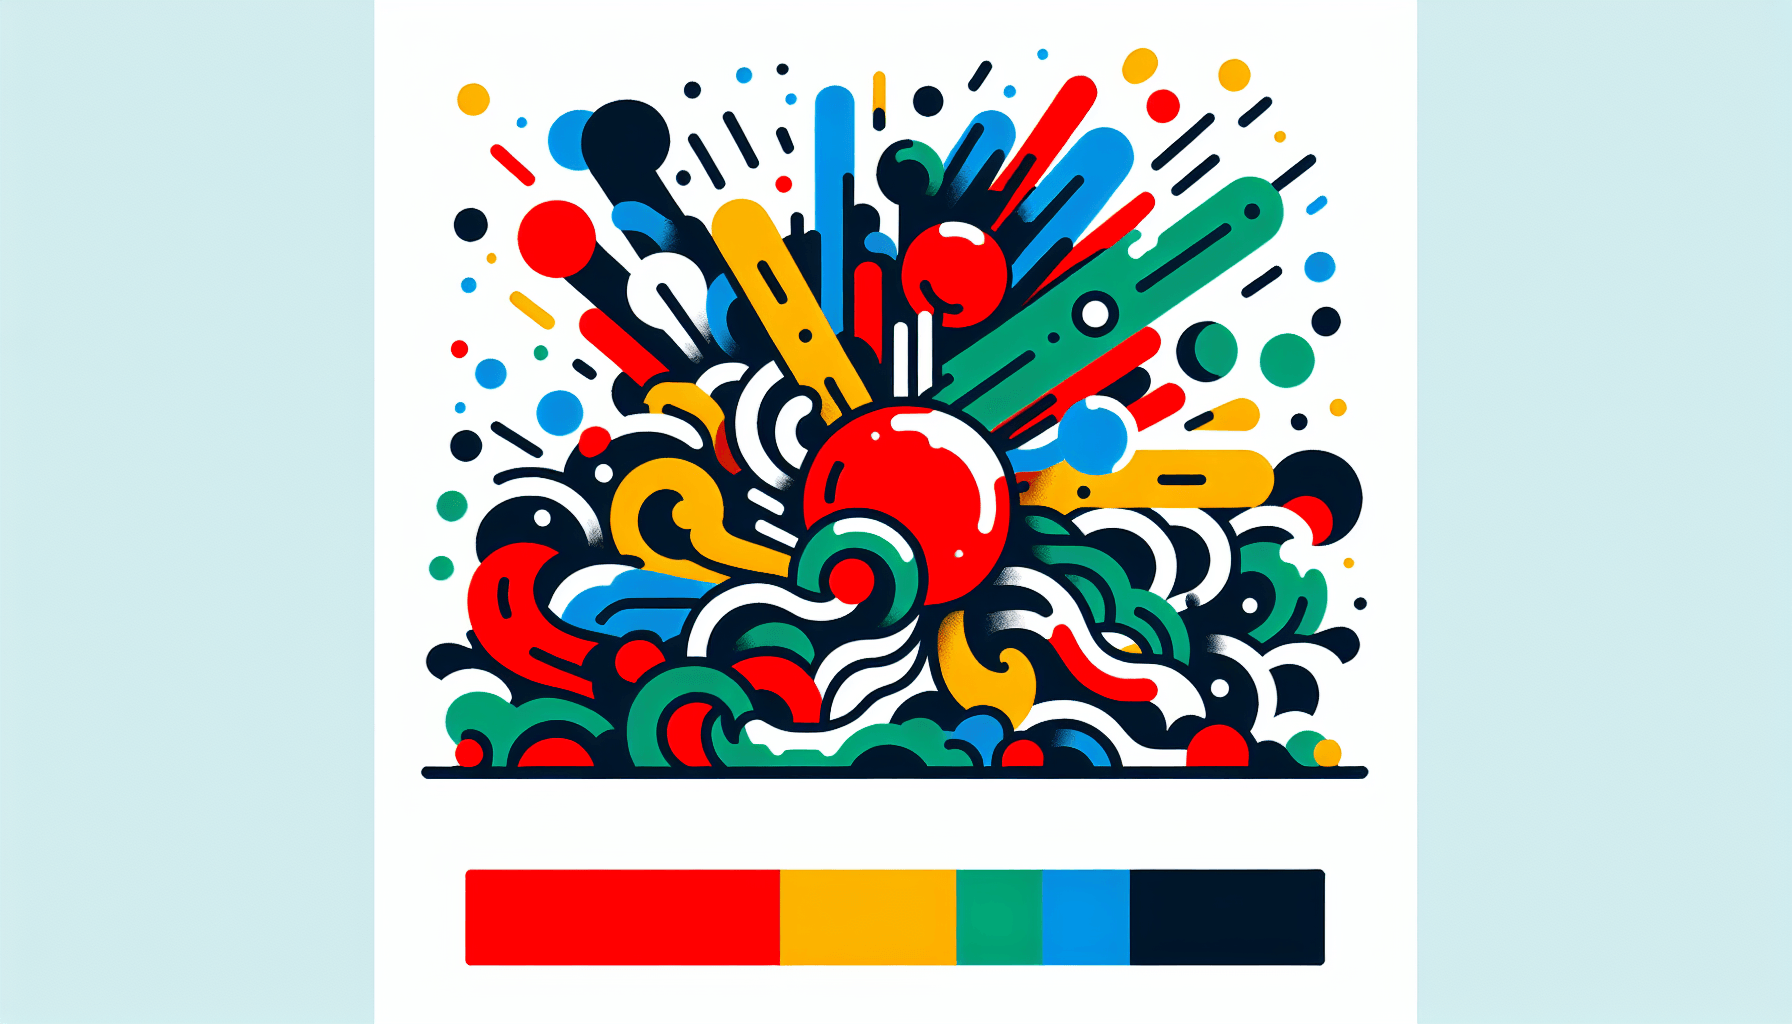 Disruption in flat illustration style and white background, red #f47574, green #88c7a8, yellow #fcc44b, and blue #645bc8 colors.